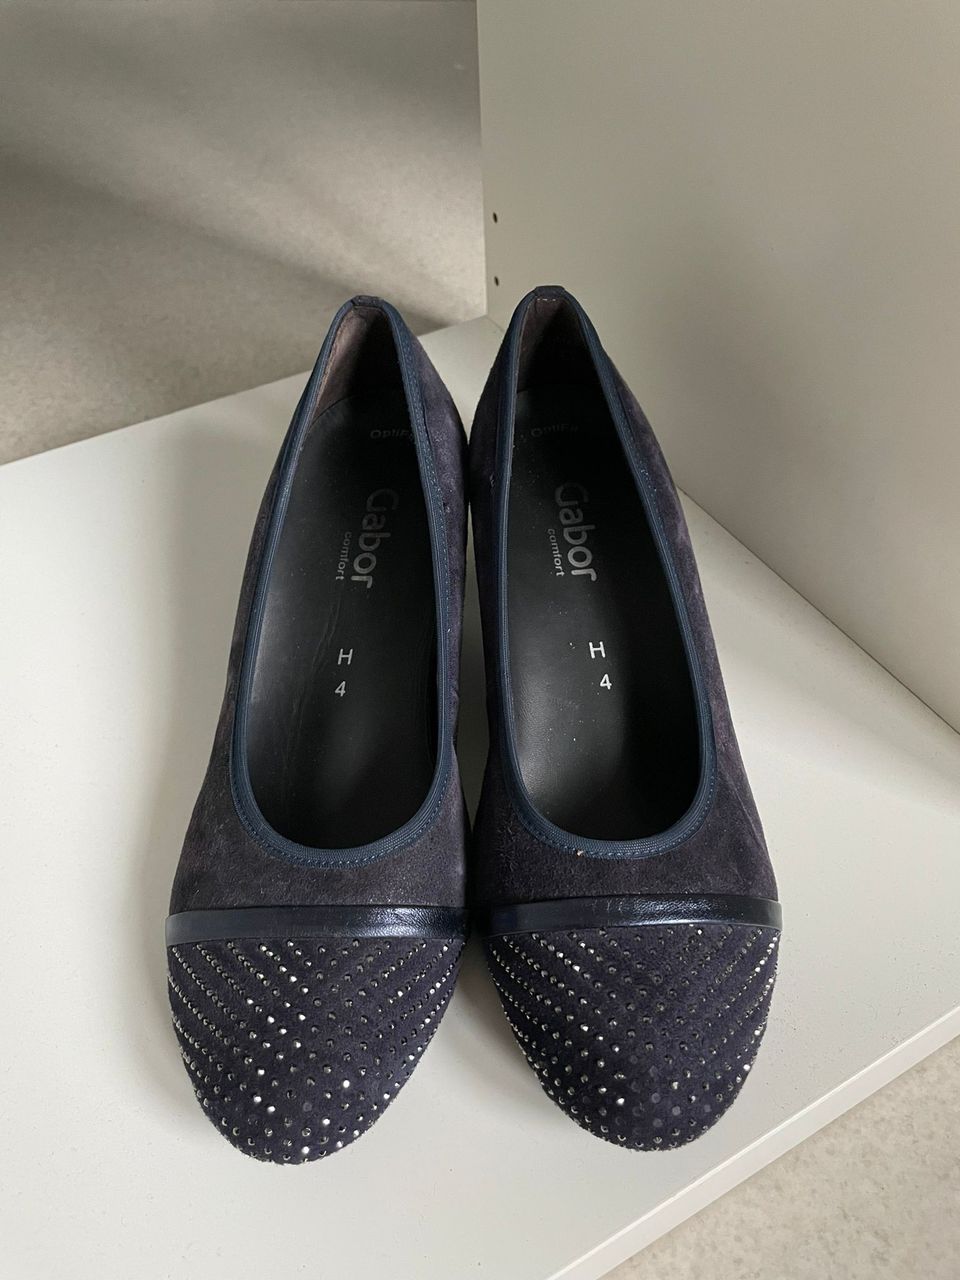 Gabor blue dress shoes. Great condition, worn once.